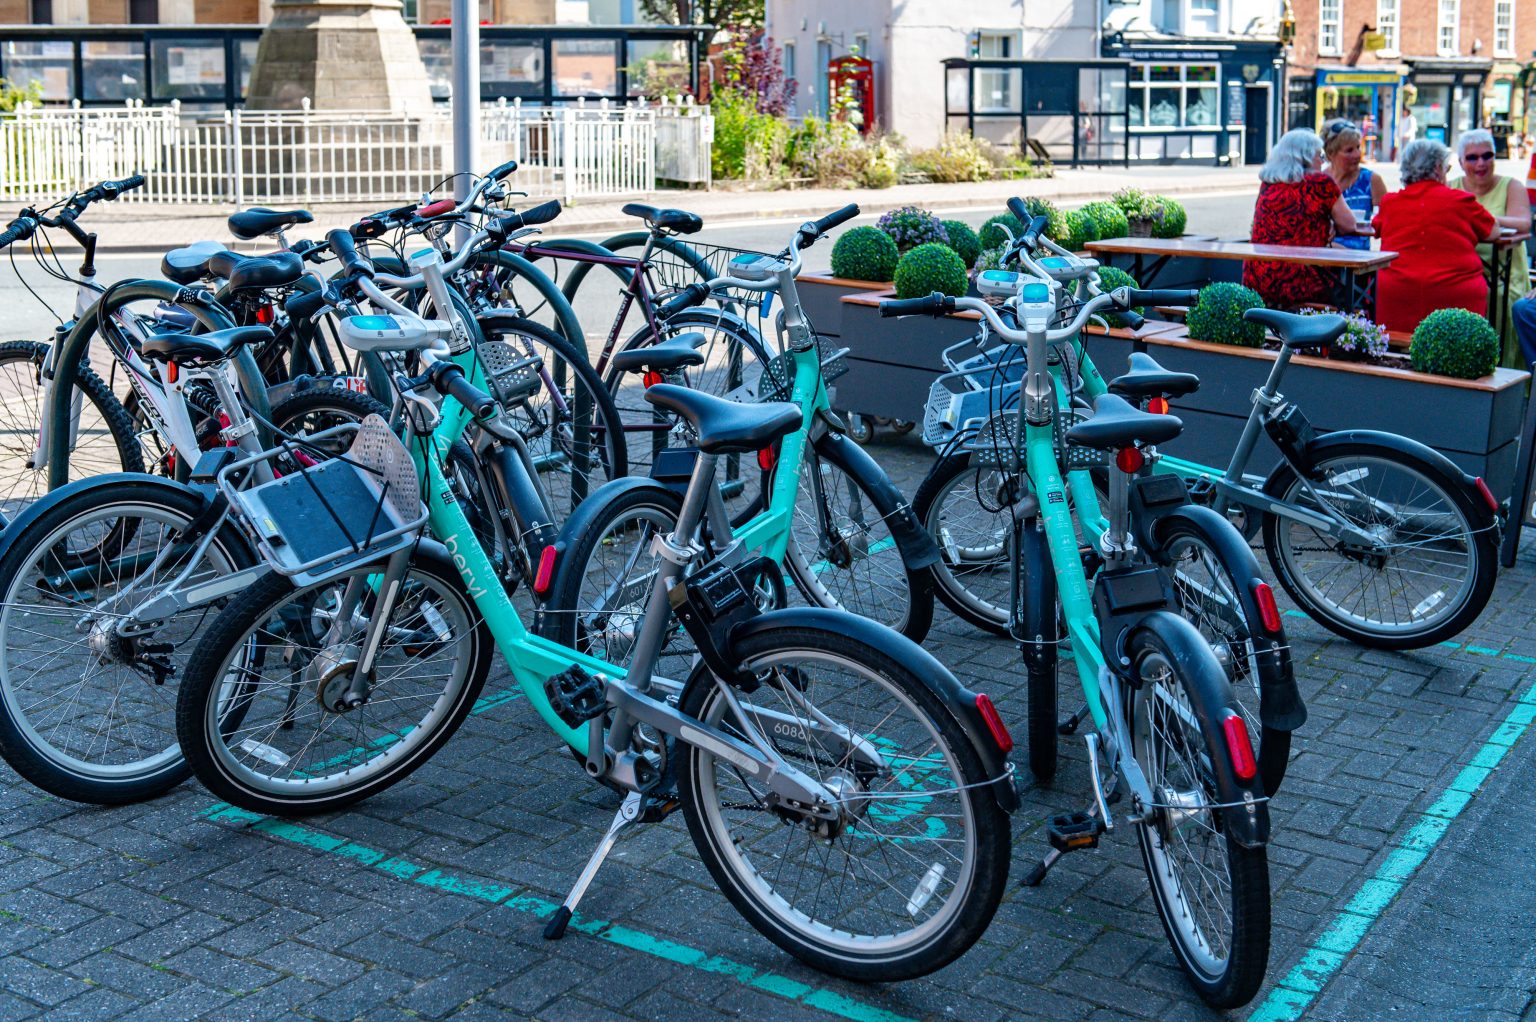 NEWS | Beryl extends bike share scheme in Hereford for five more years